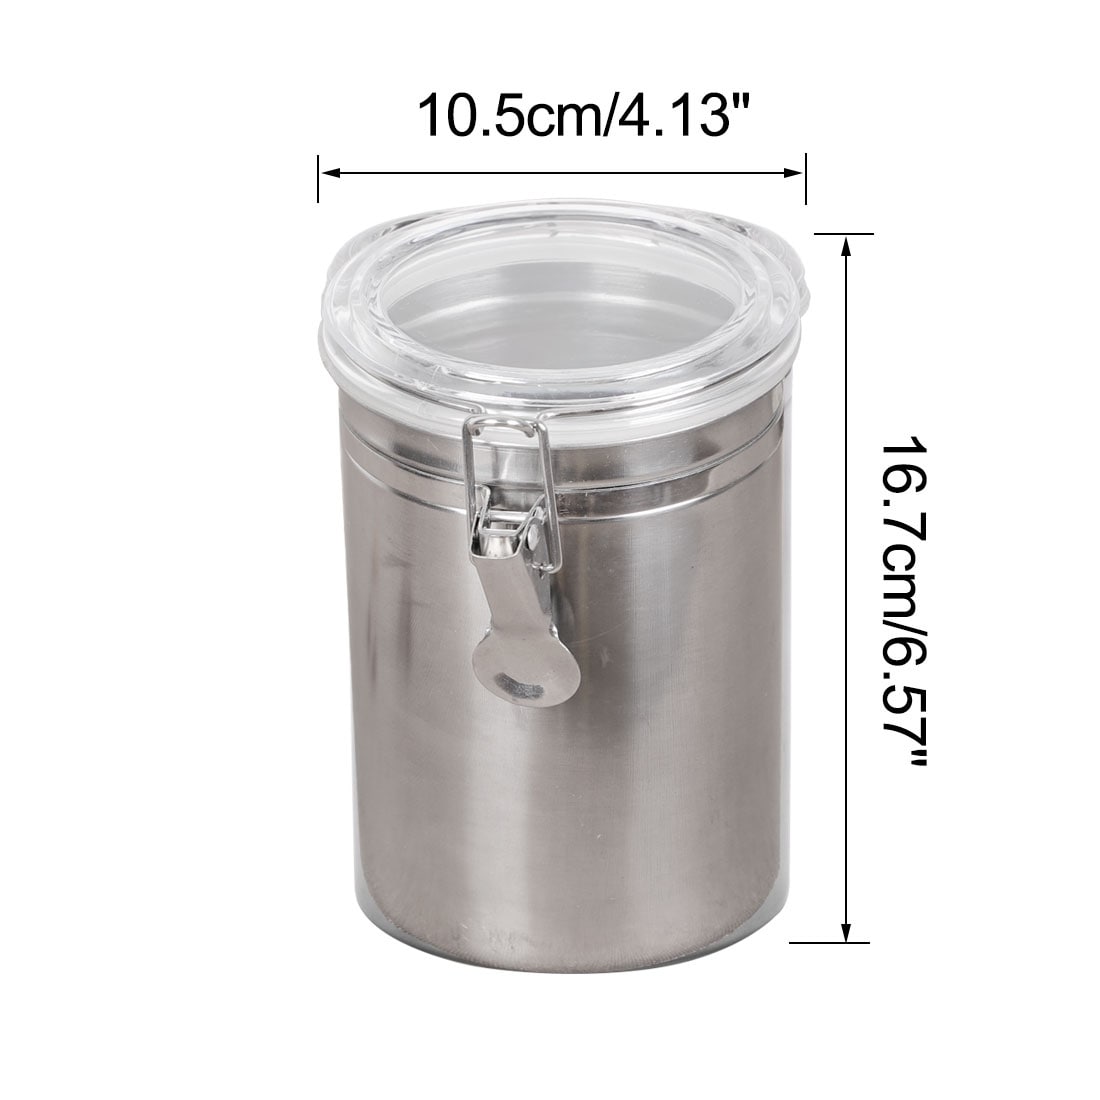 https://ak1.ostkcdn.com/images/products/is/images/direct/a8534fac24e26b9a7aec17db8a4334fd33da3f32/Stainless-Steel-Airtight-Canister-Food-Container.jpg